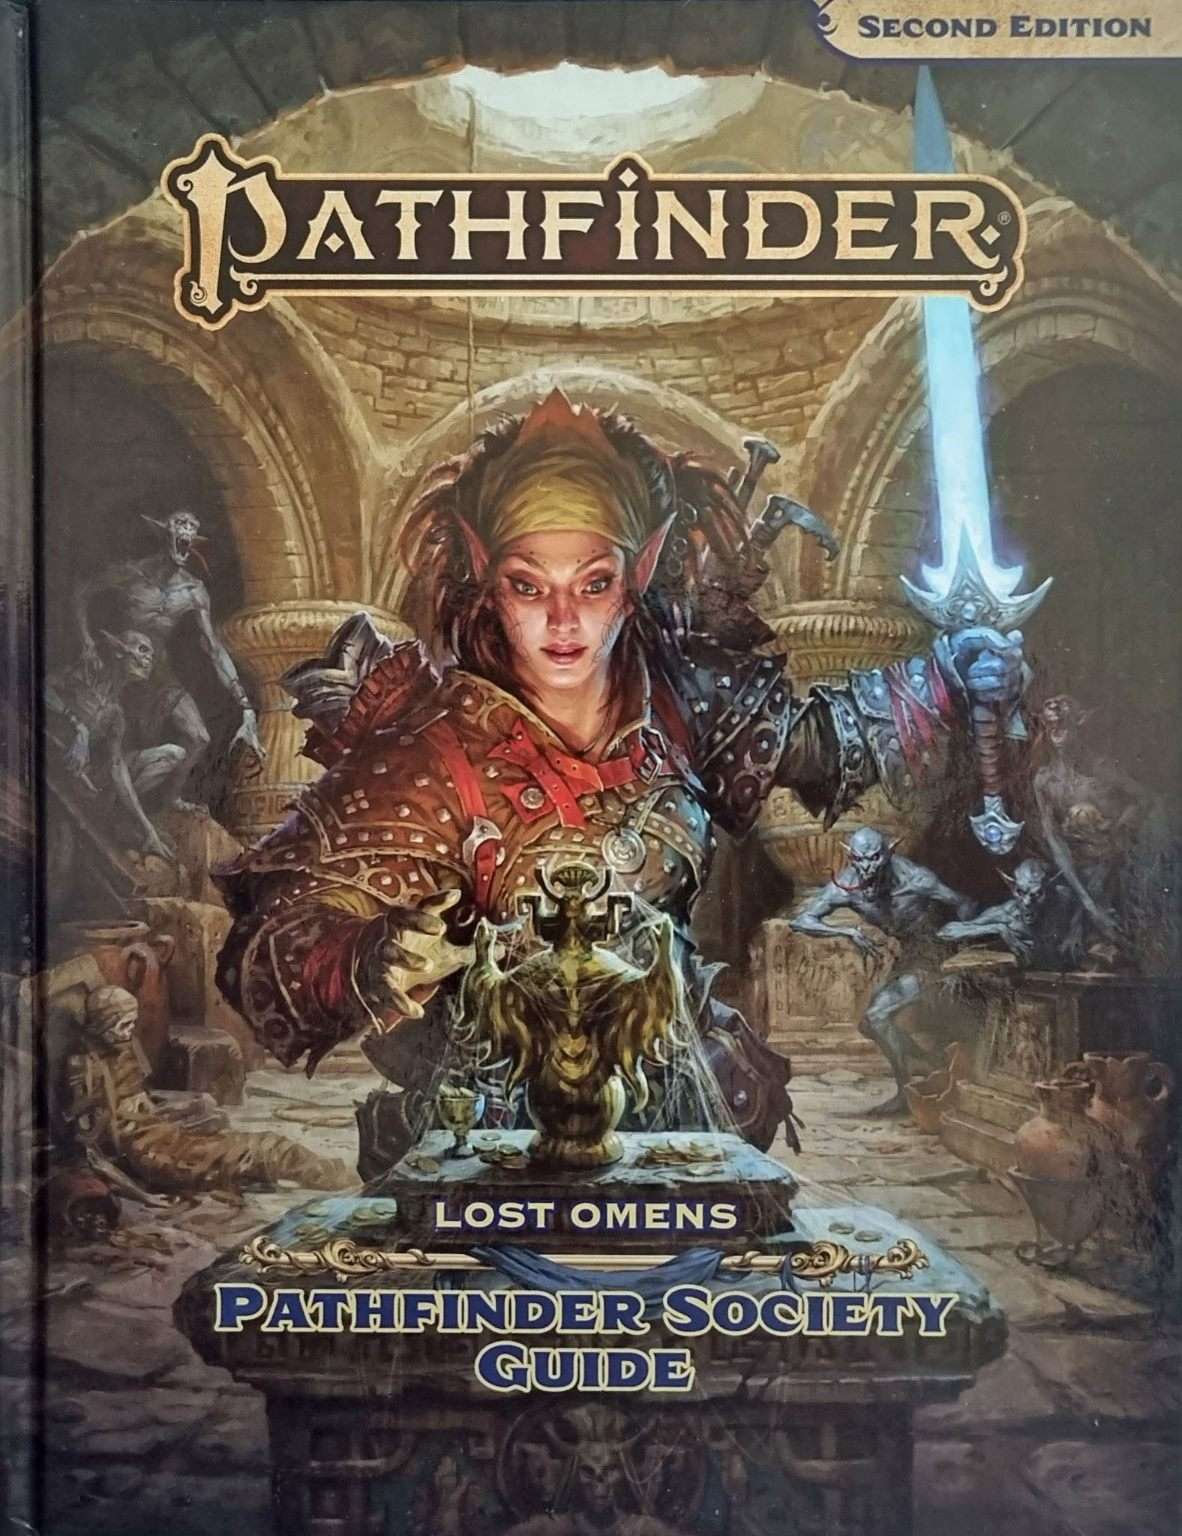 Pathfinder: Lost Omens - Pathfinder Society Guide - Second Edition 2e